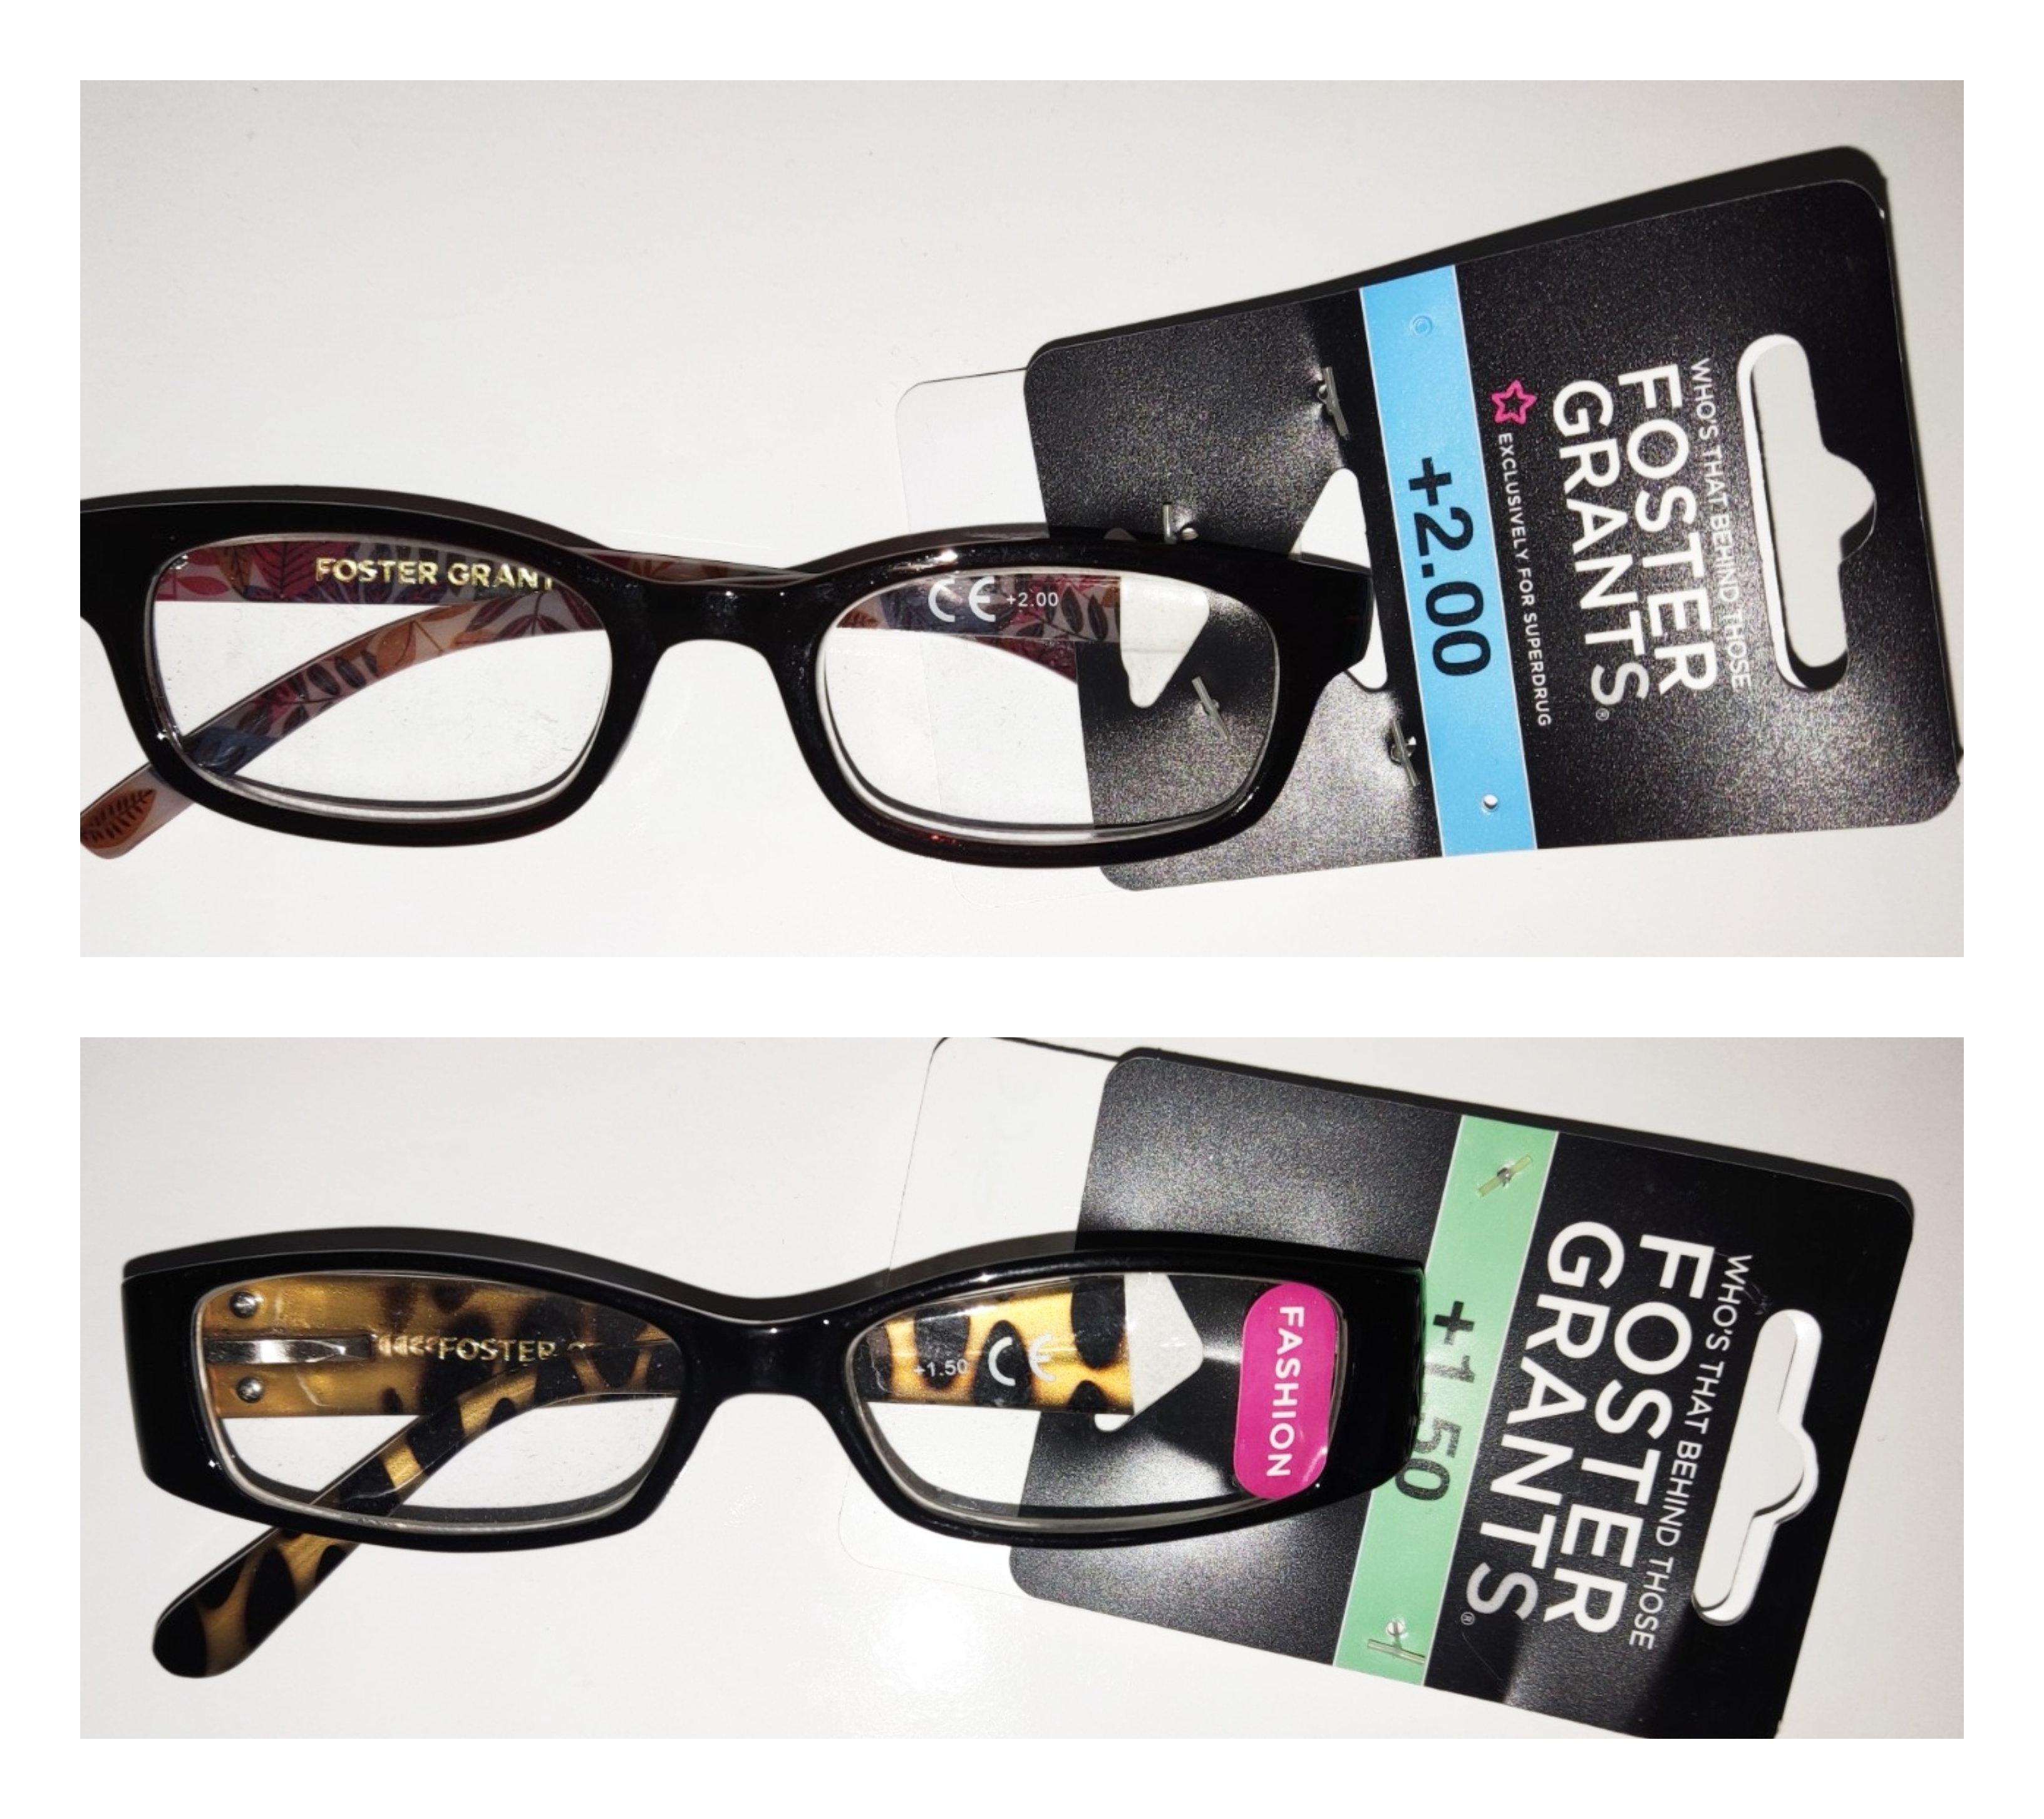 A collection of American Foster Grants reading glasses from 1.00+ to 2.00. - Image 2 of 3